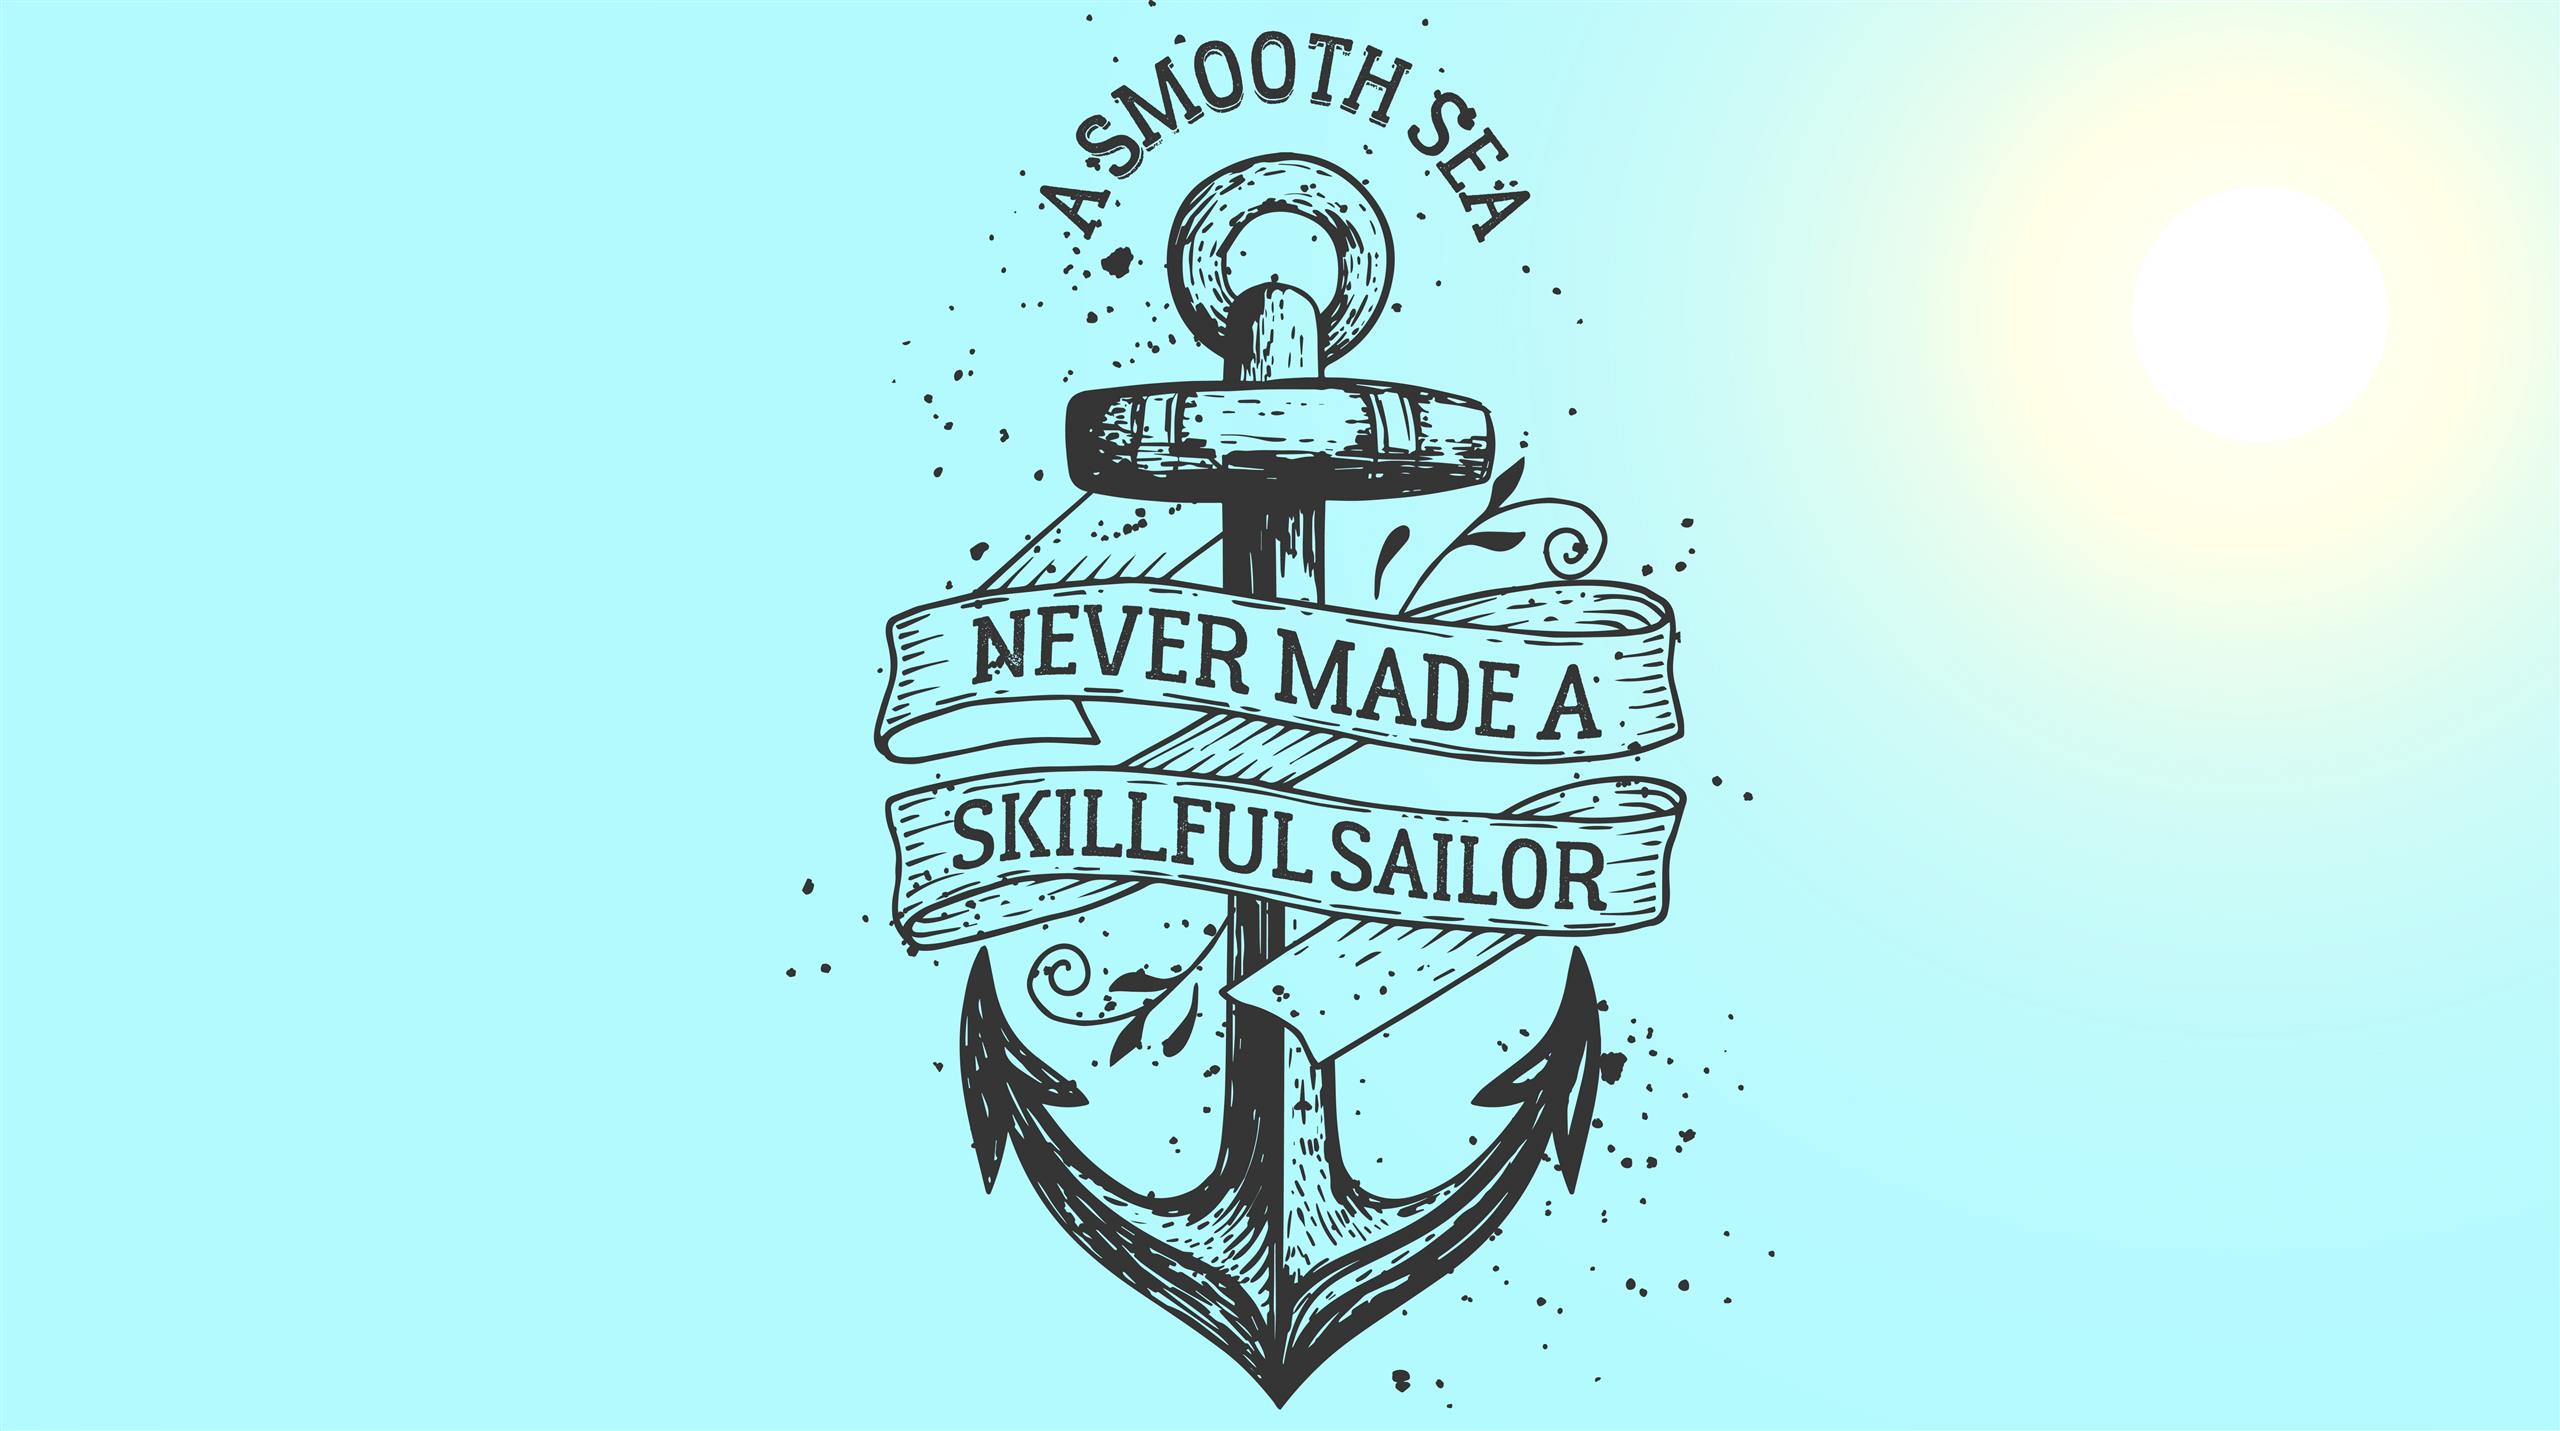 Motive Quote, A Smooth Sea logo, Artistic, Typography, Sailor, HD wallpaper